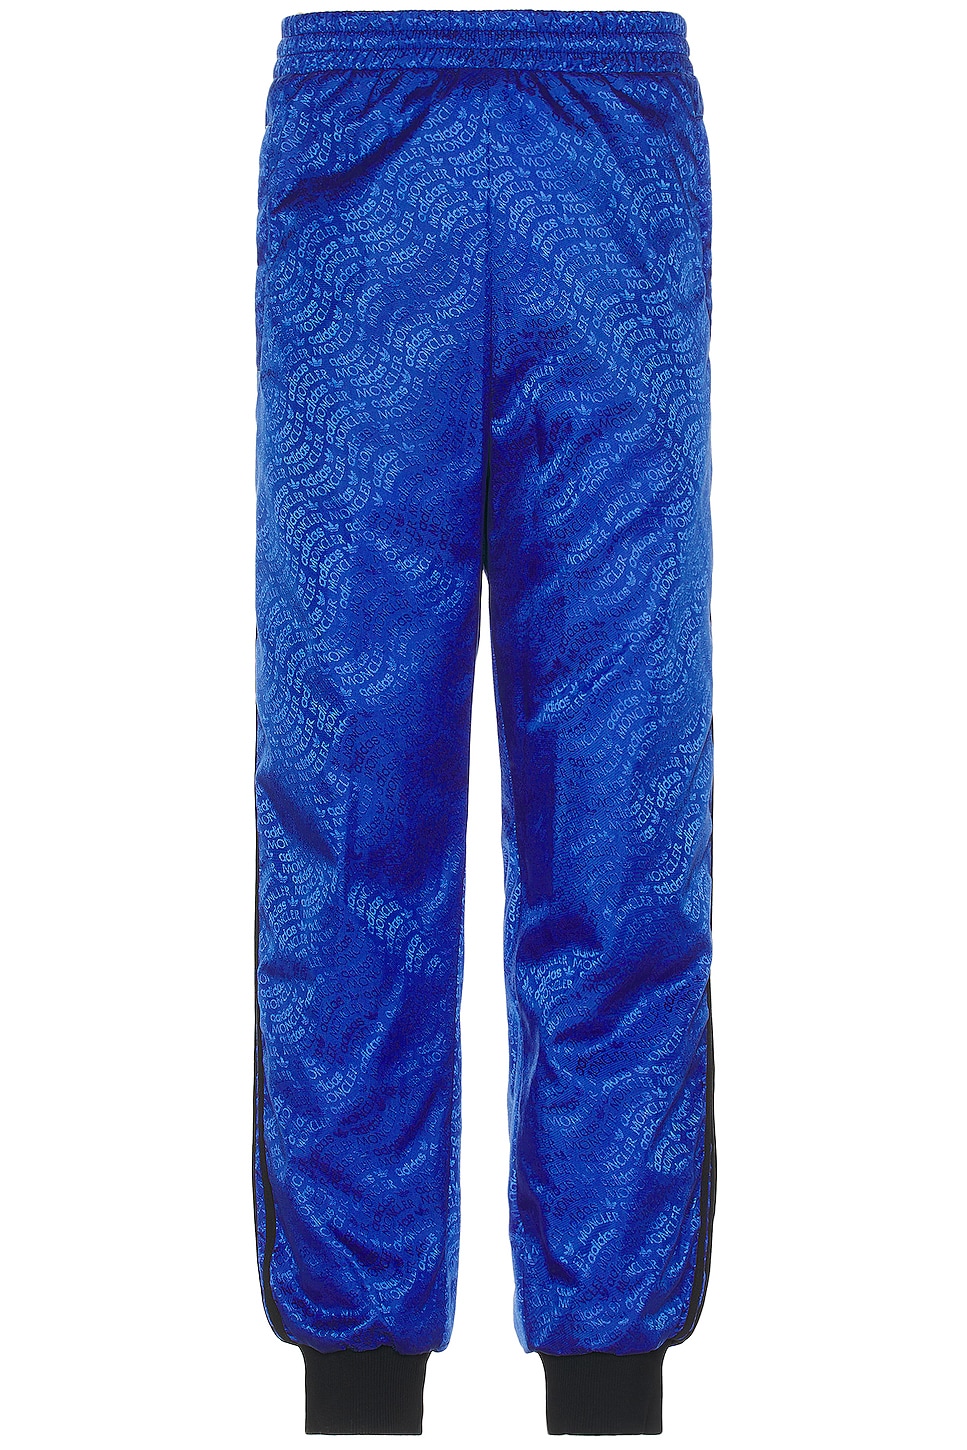 Image 1 of Moncler Genius x Adidas Trousers in Blue